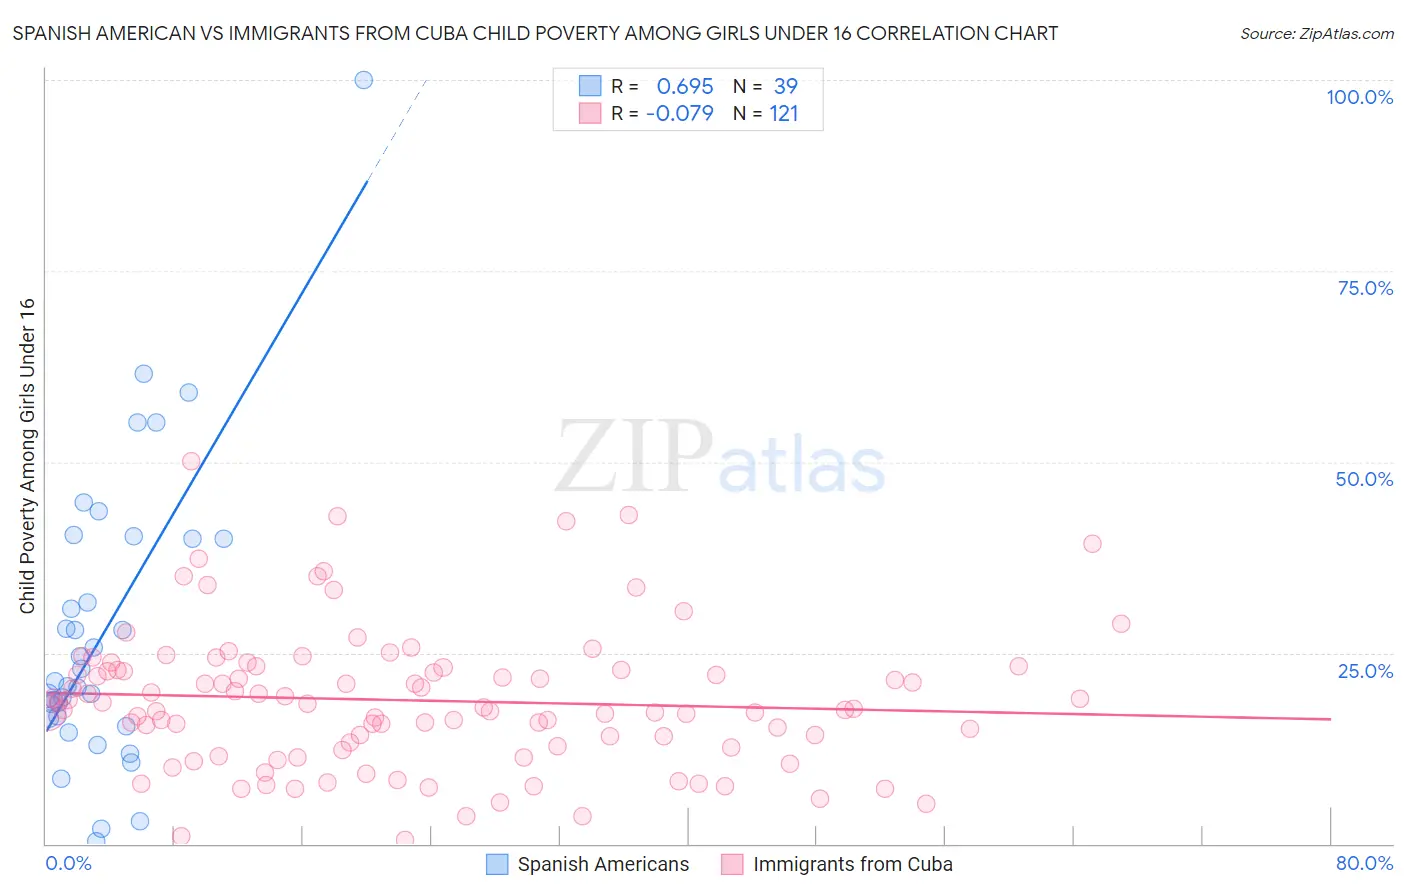 Spanish American vs Immigrants from Cuba Child Poverty Among Girls Under 16